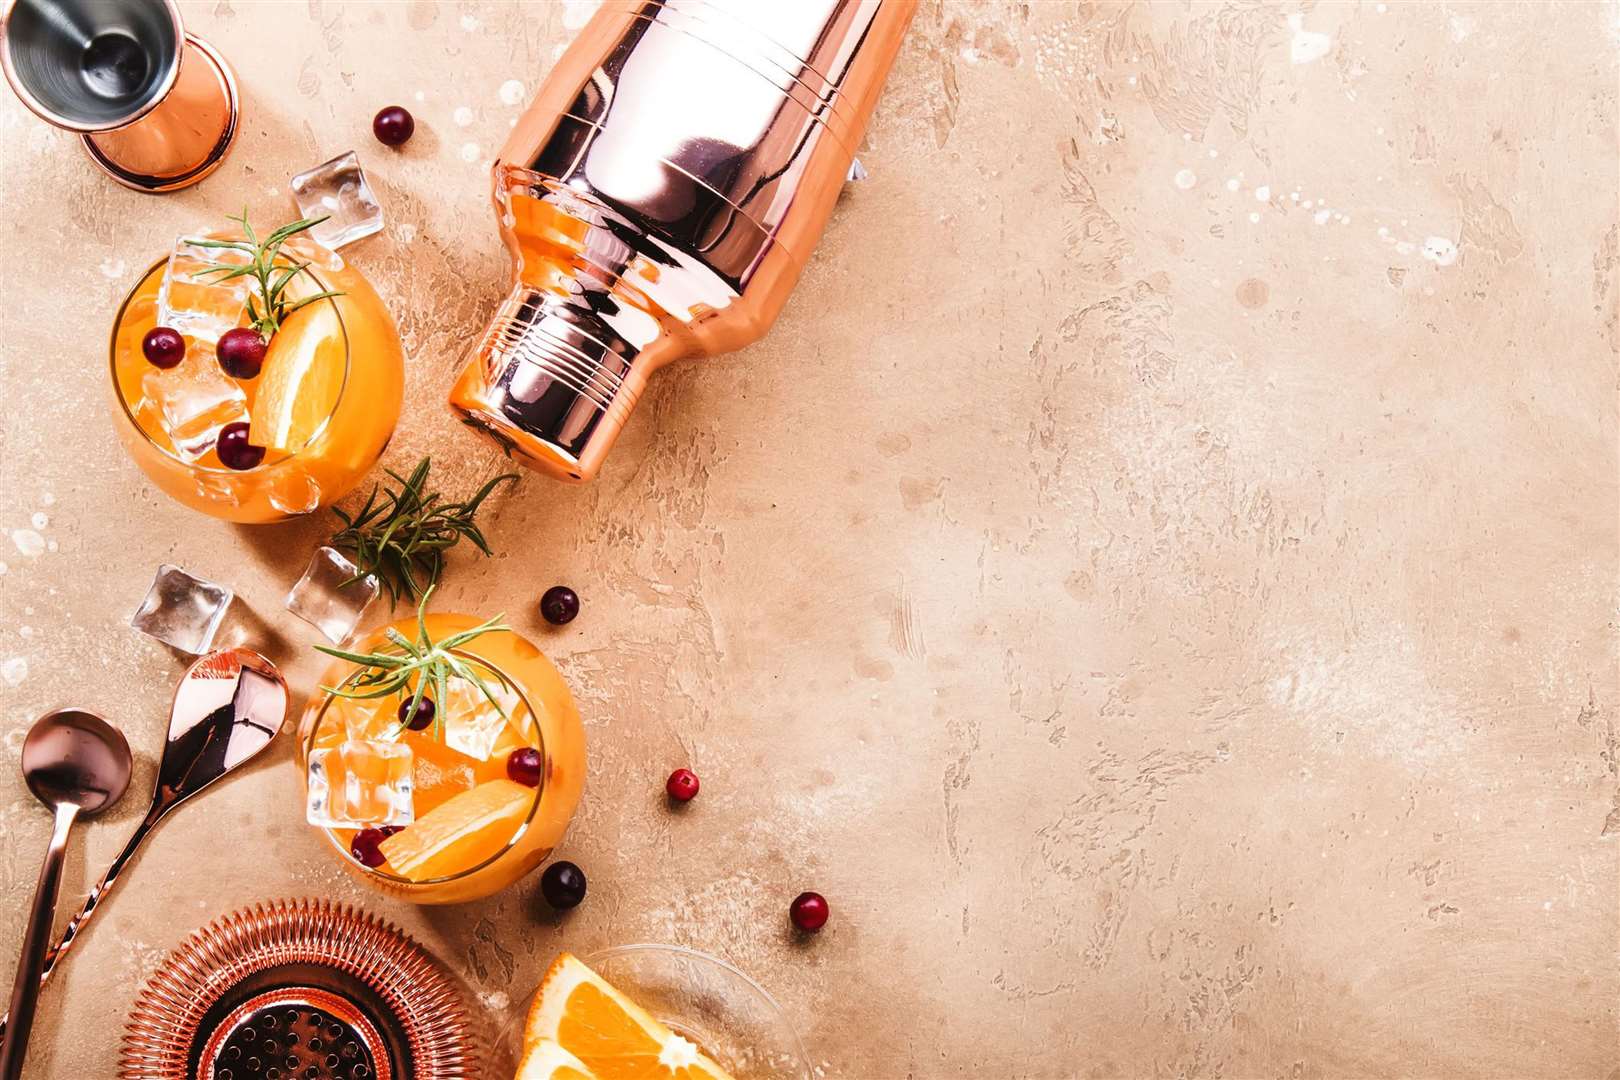 Stir up some cocktail mixes in the comfort of your own home. Picture: PA Photo/iStock